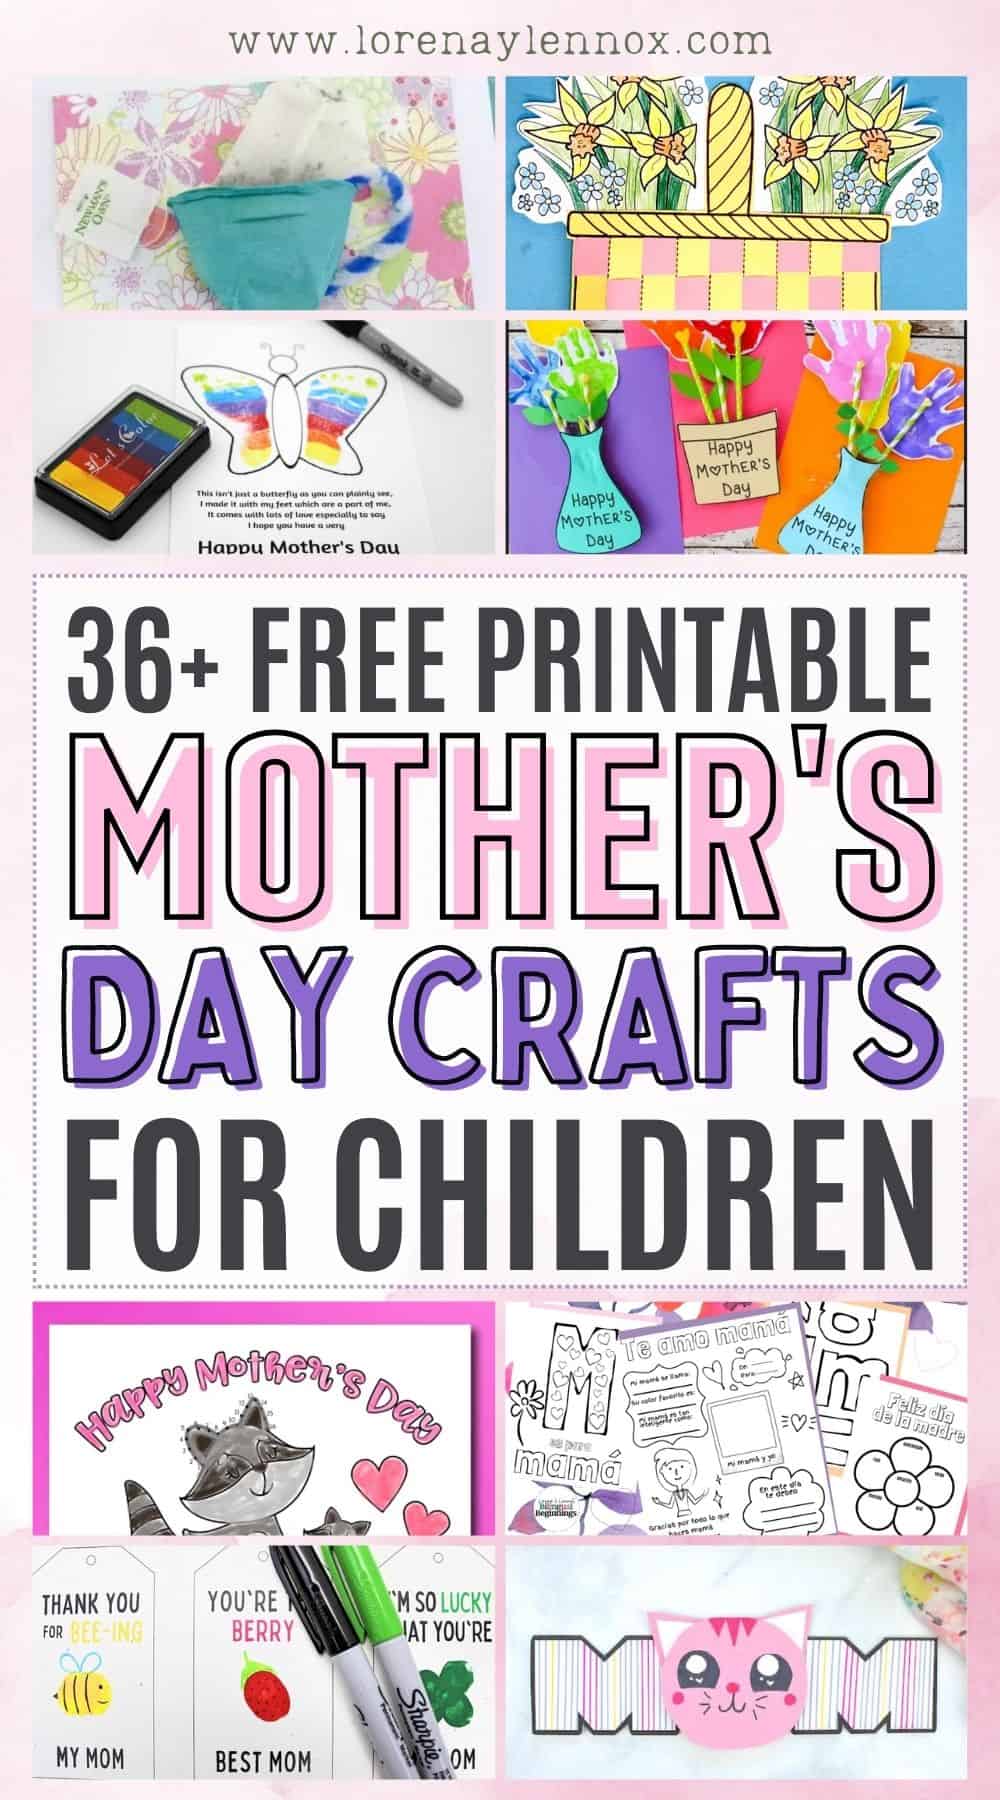 36+ Free Printable Mother's Day Crafts for Children